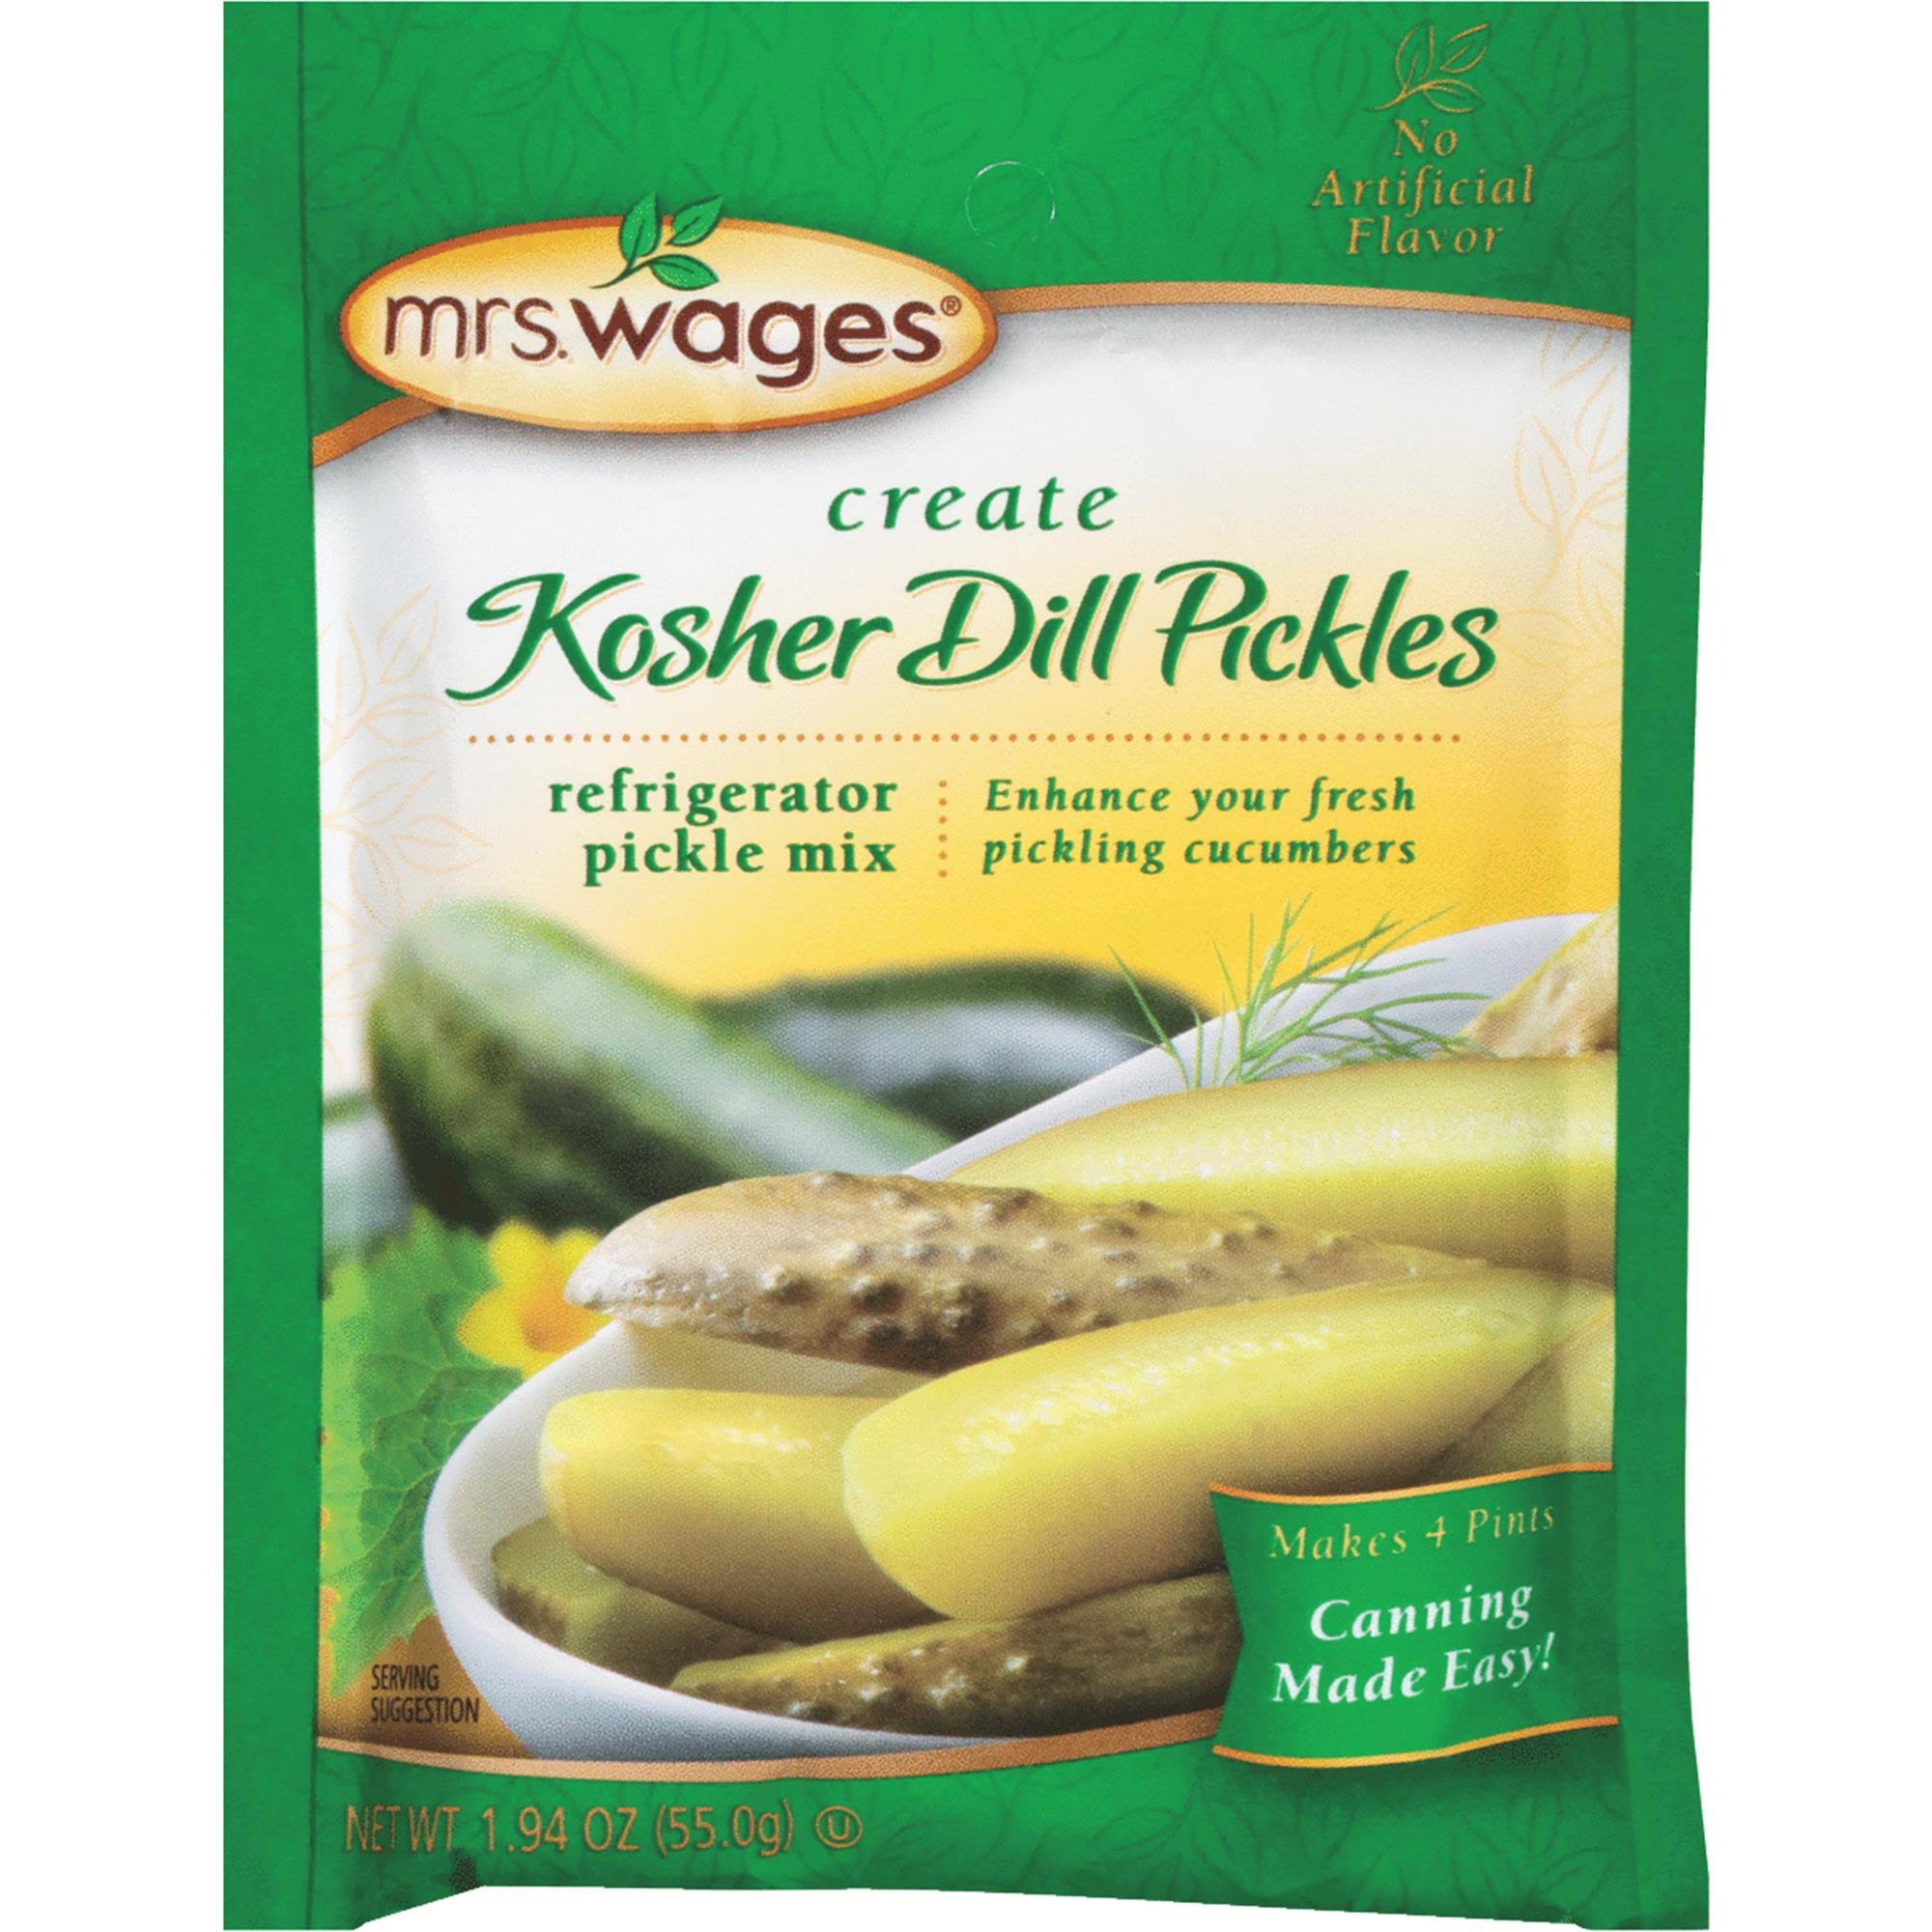 Mrs. Wages Refrigerator Kosher Dill Pickle Mix - 1.94oz